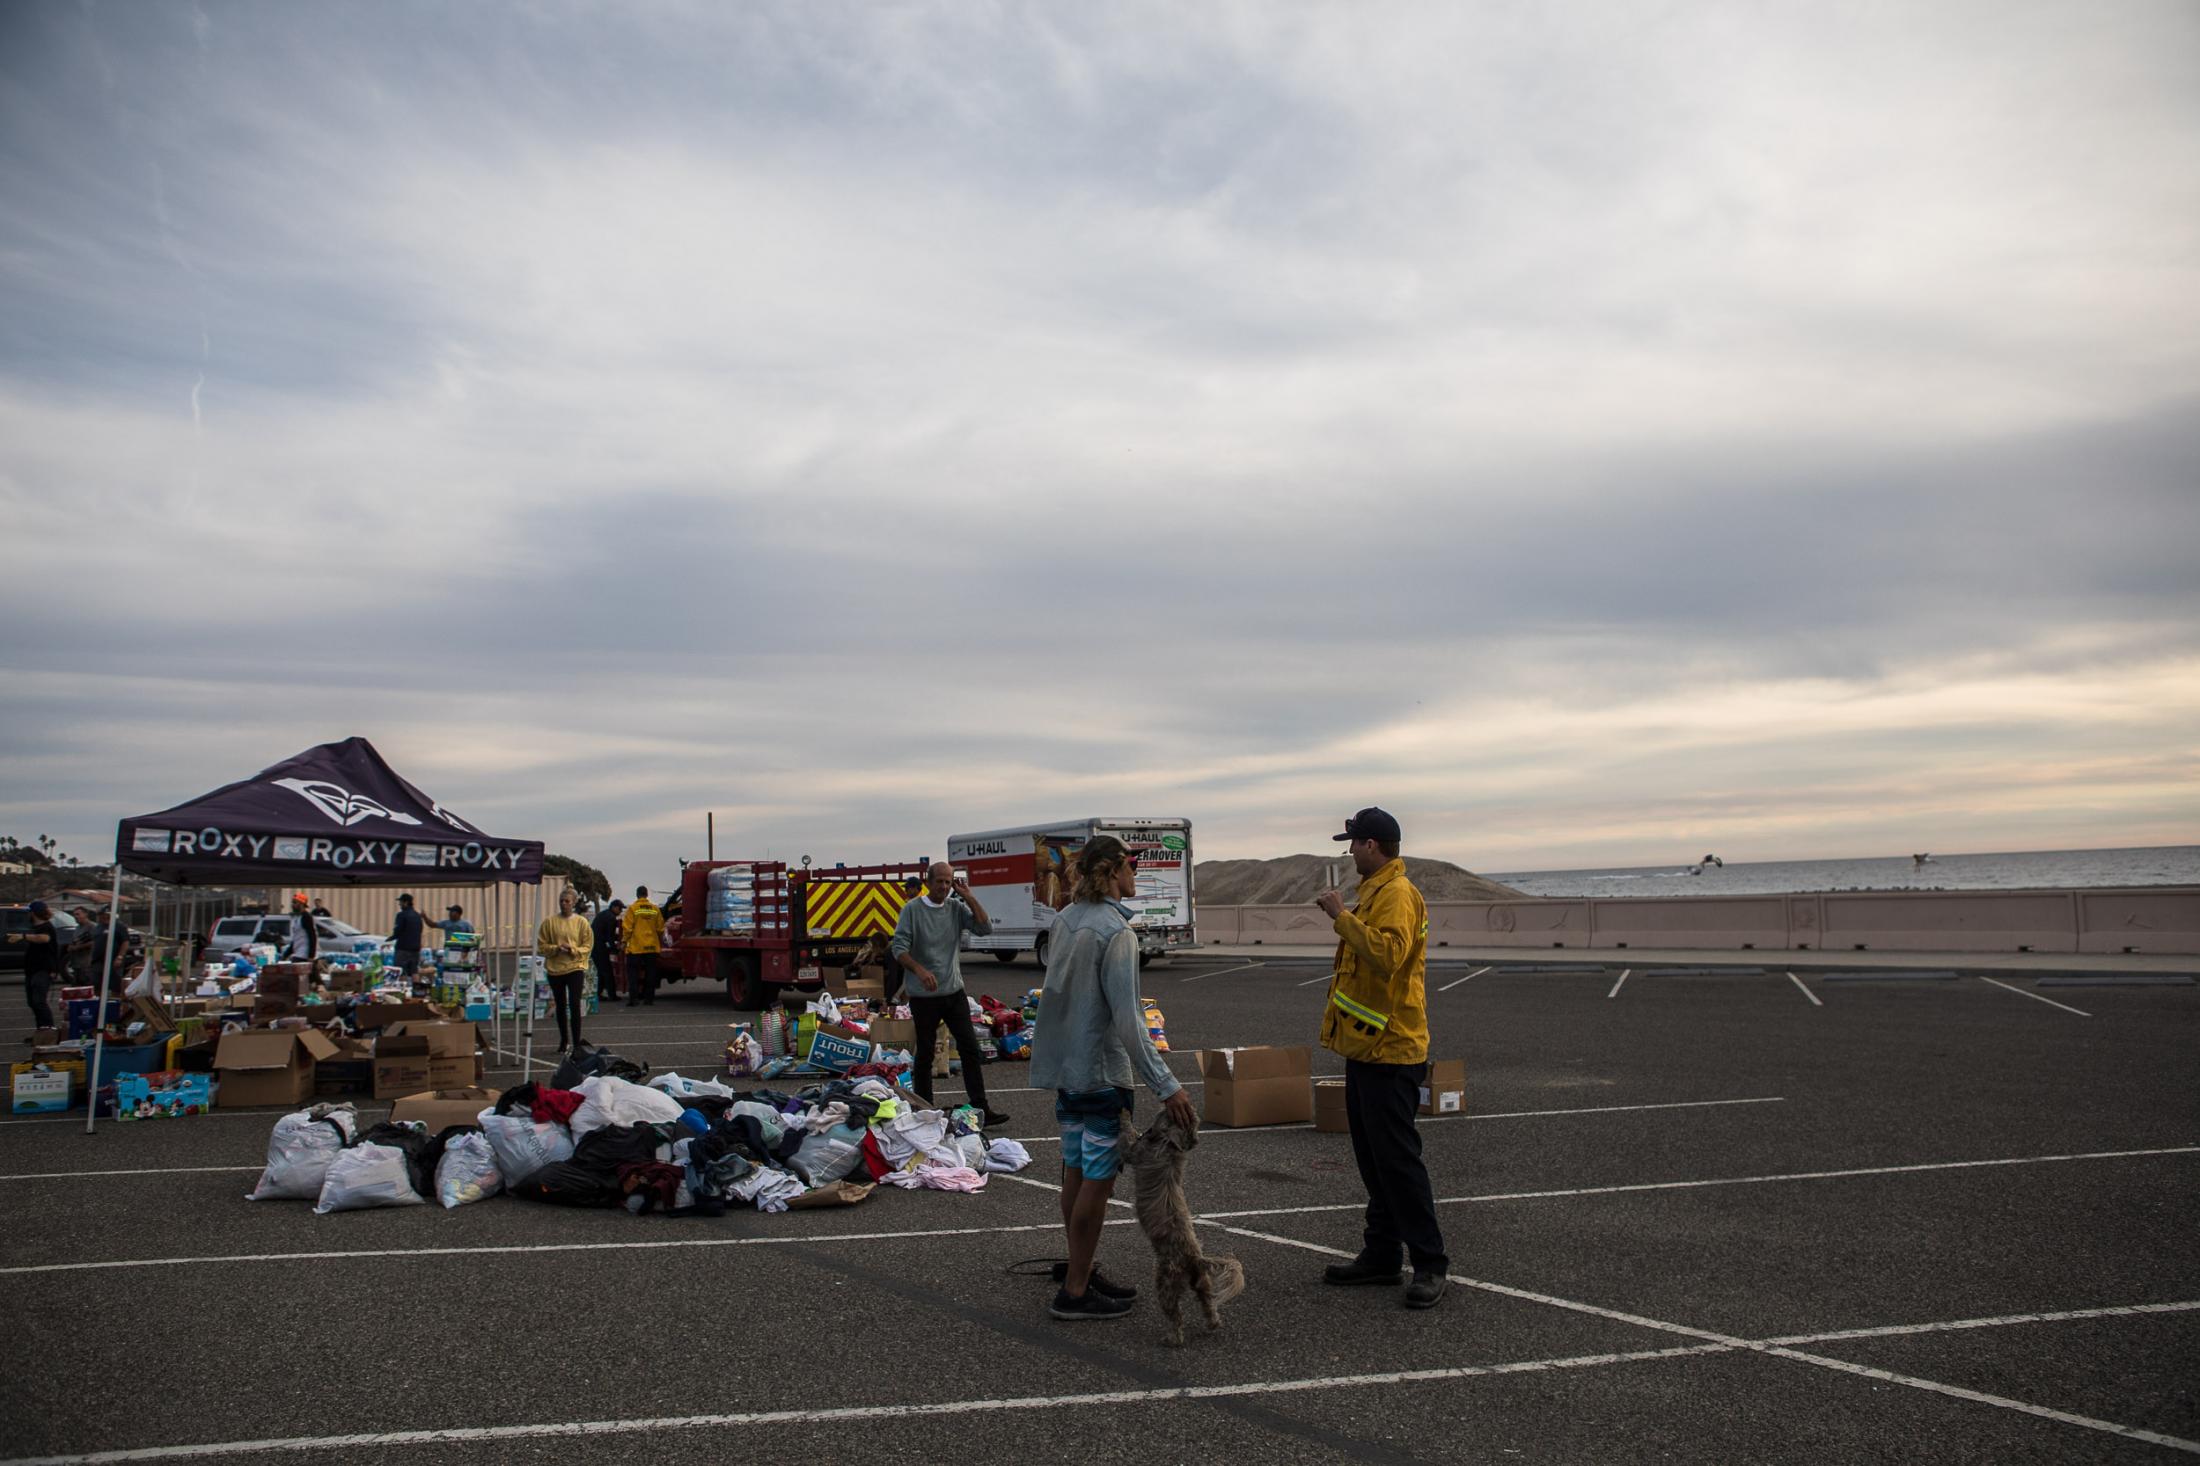 - The Woolsey fire - Supplies left on Zuma beach for the people who stayed...